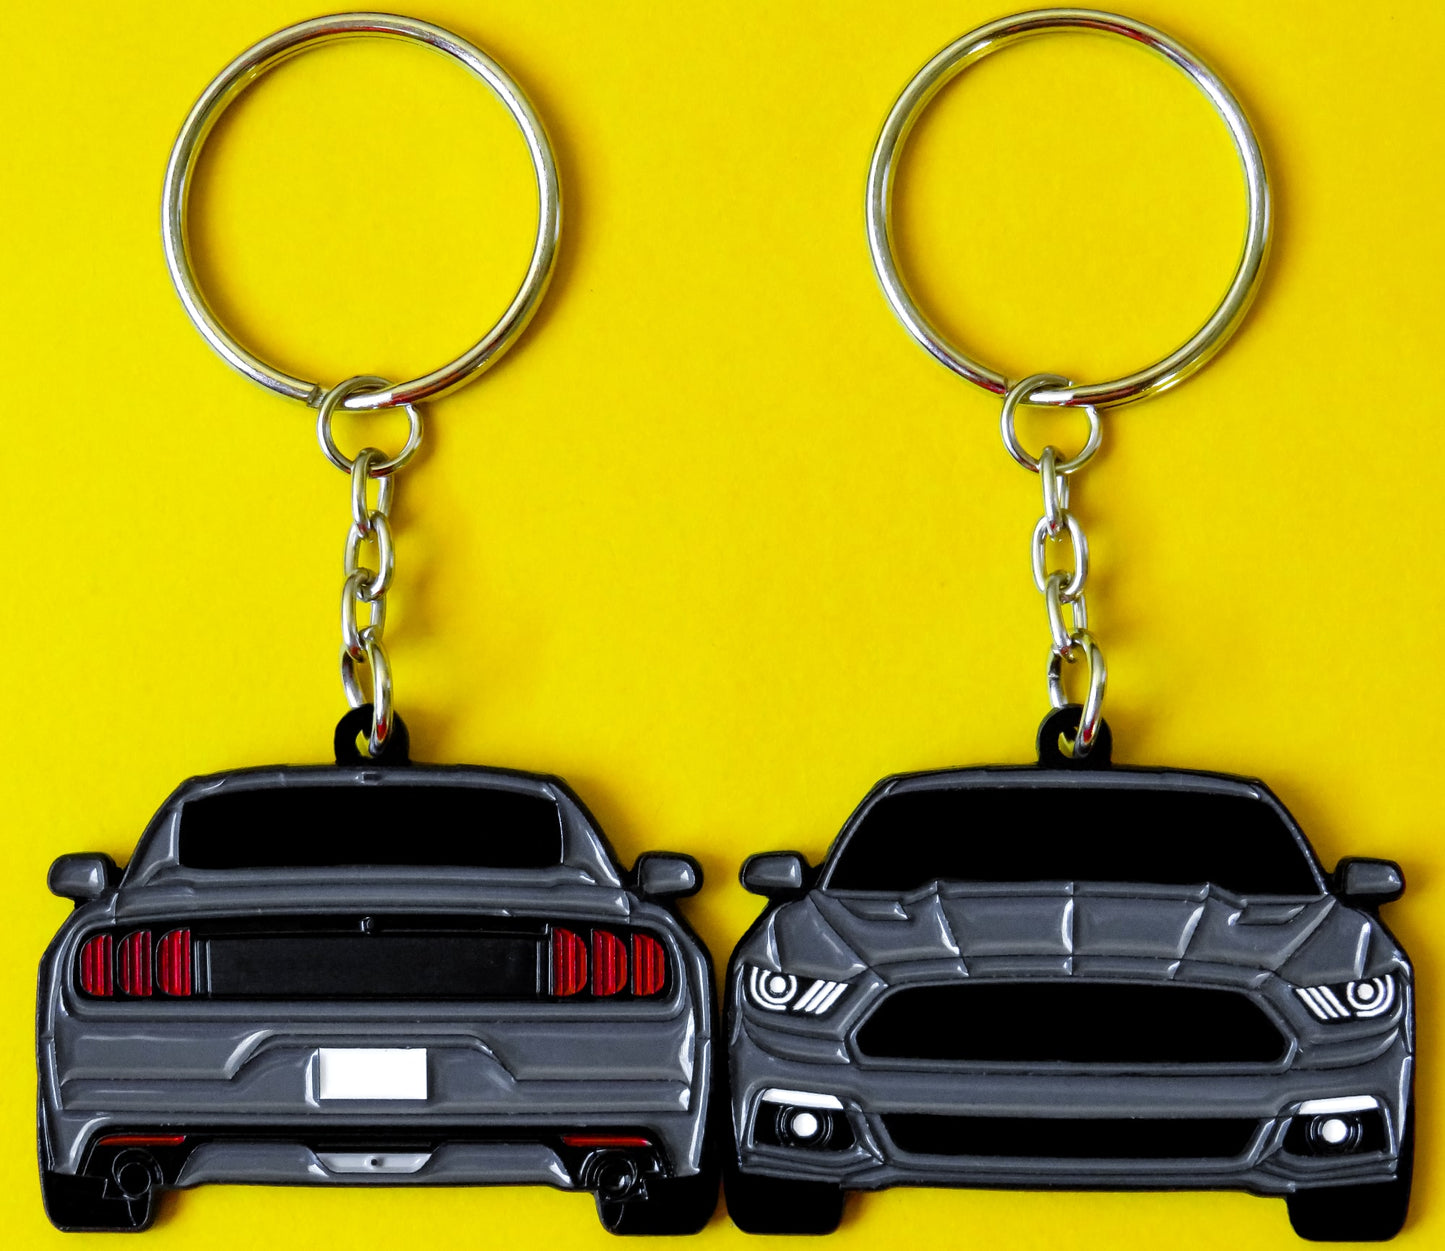 Keychain that fits on a key fob cover for Ford Mustang Gray sixth generation S550 Stang lanyard for car guys and enthusiasts, girlfriend, boyfriend, father, dad, mother, mom, him, her, and more. Apparel and parts 2015 2016 2017 2018 2019 2020 2021 2022 turbo cyclone 5.0 2.3